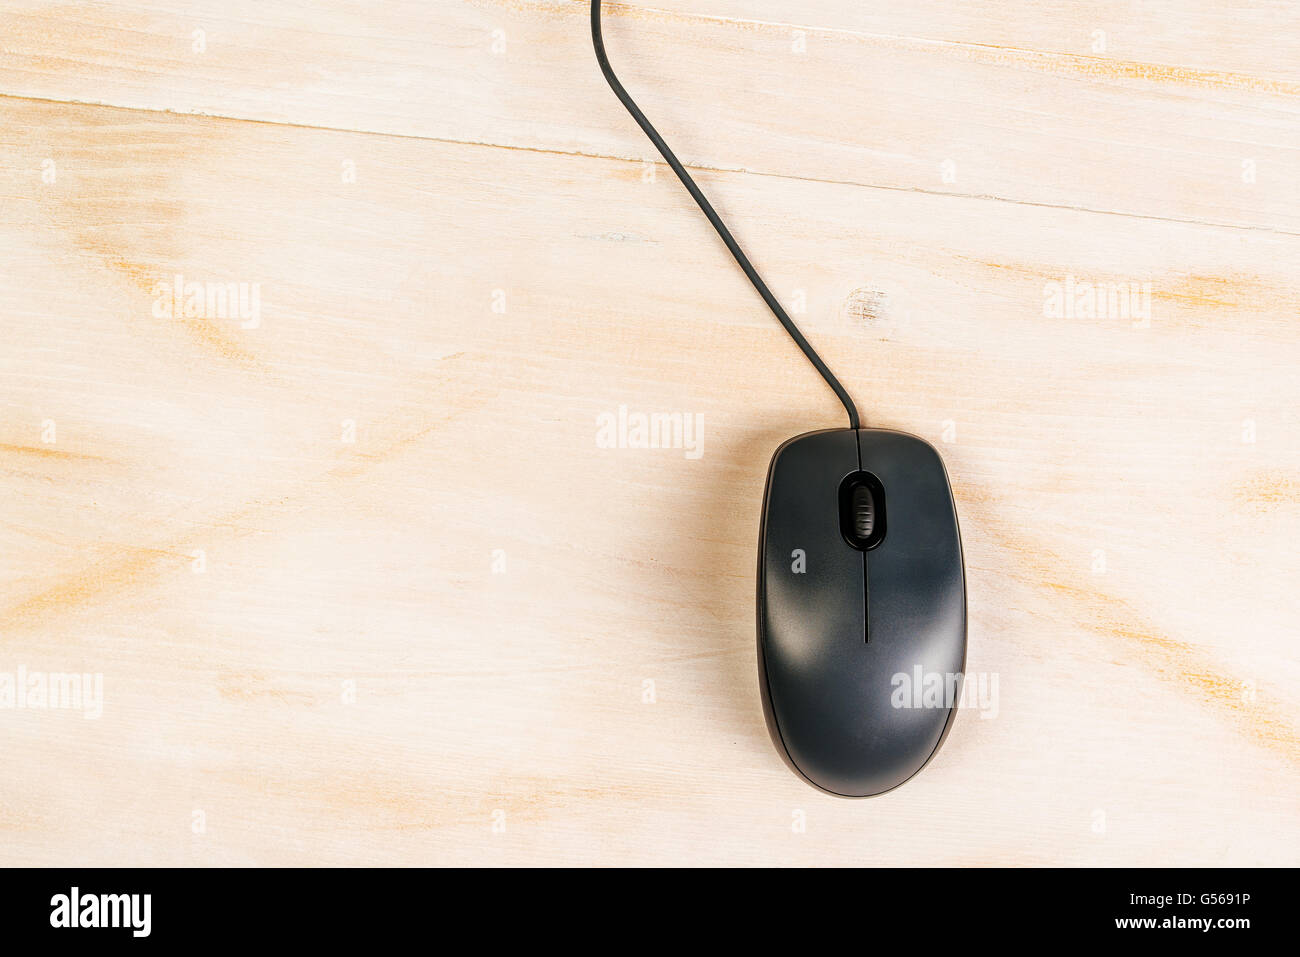 Computer mouse with cord on office desk, top view Stock Photo